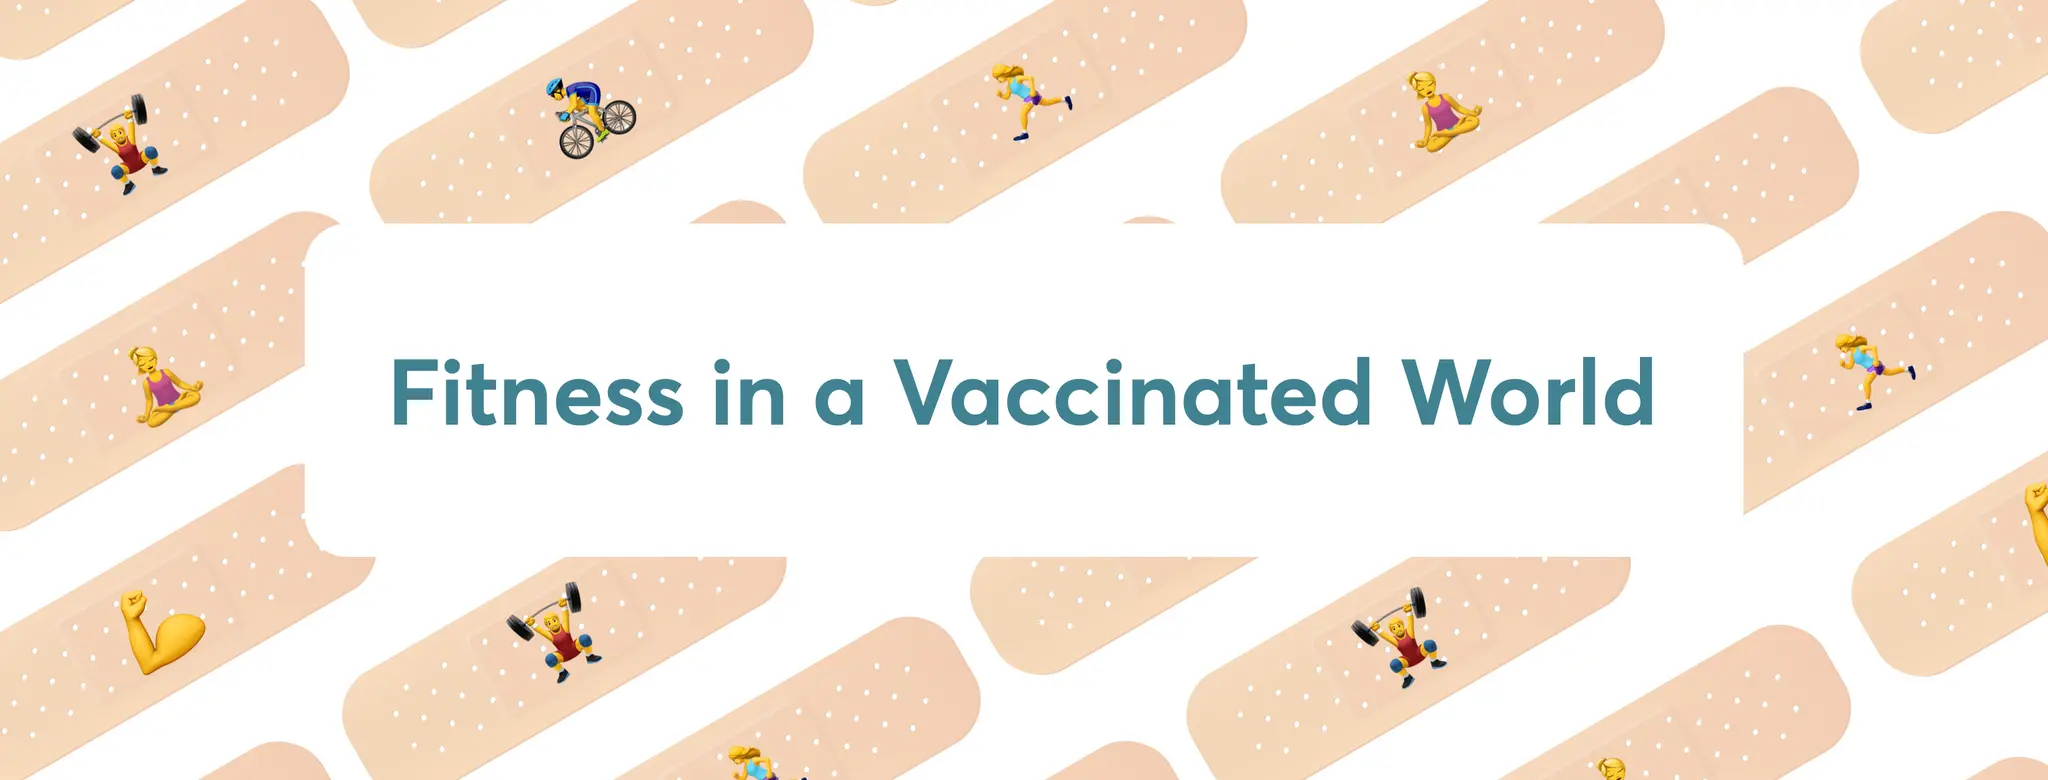 fitness in a vaccinated world